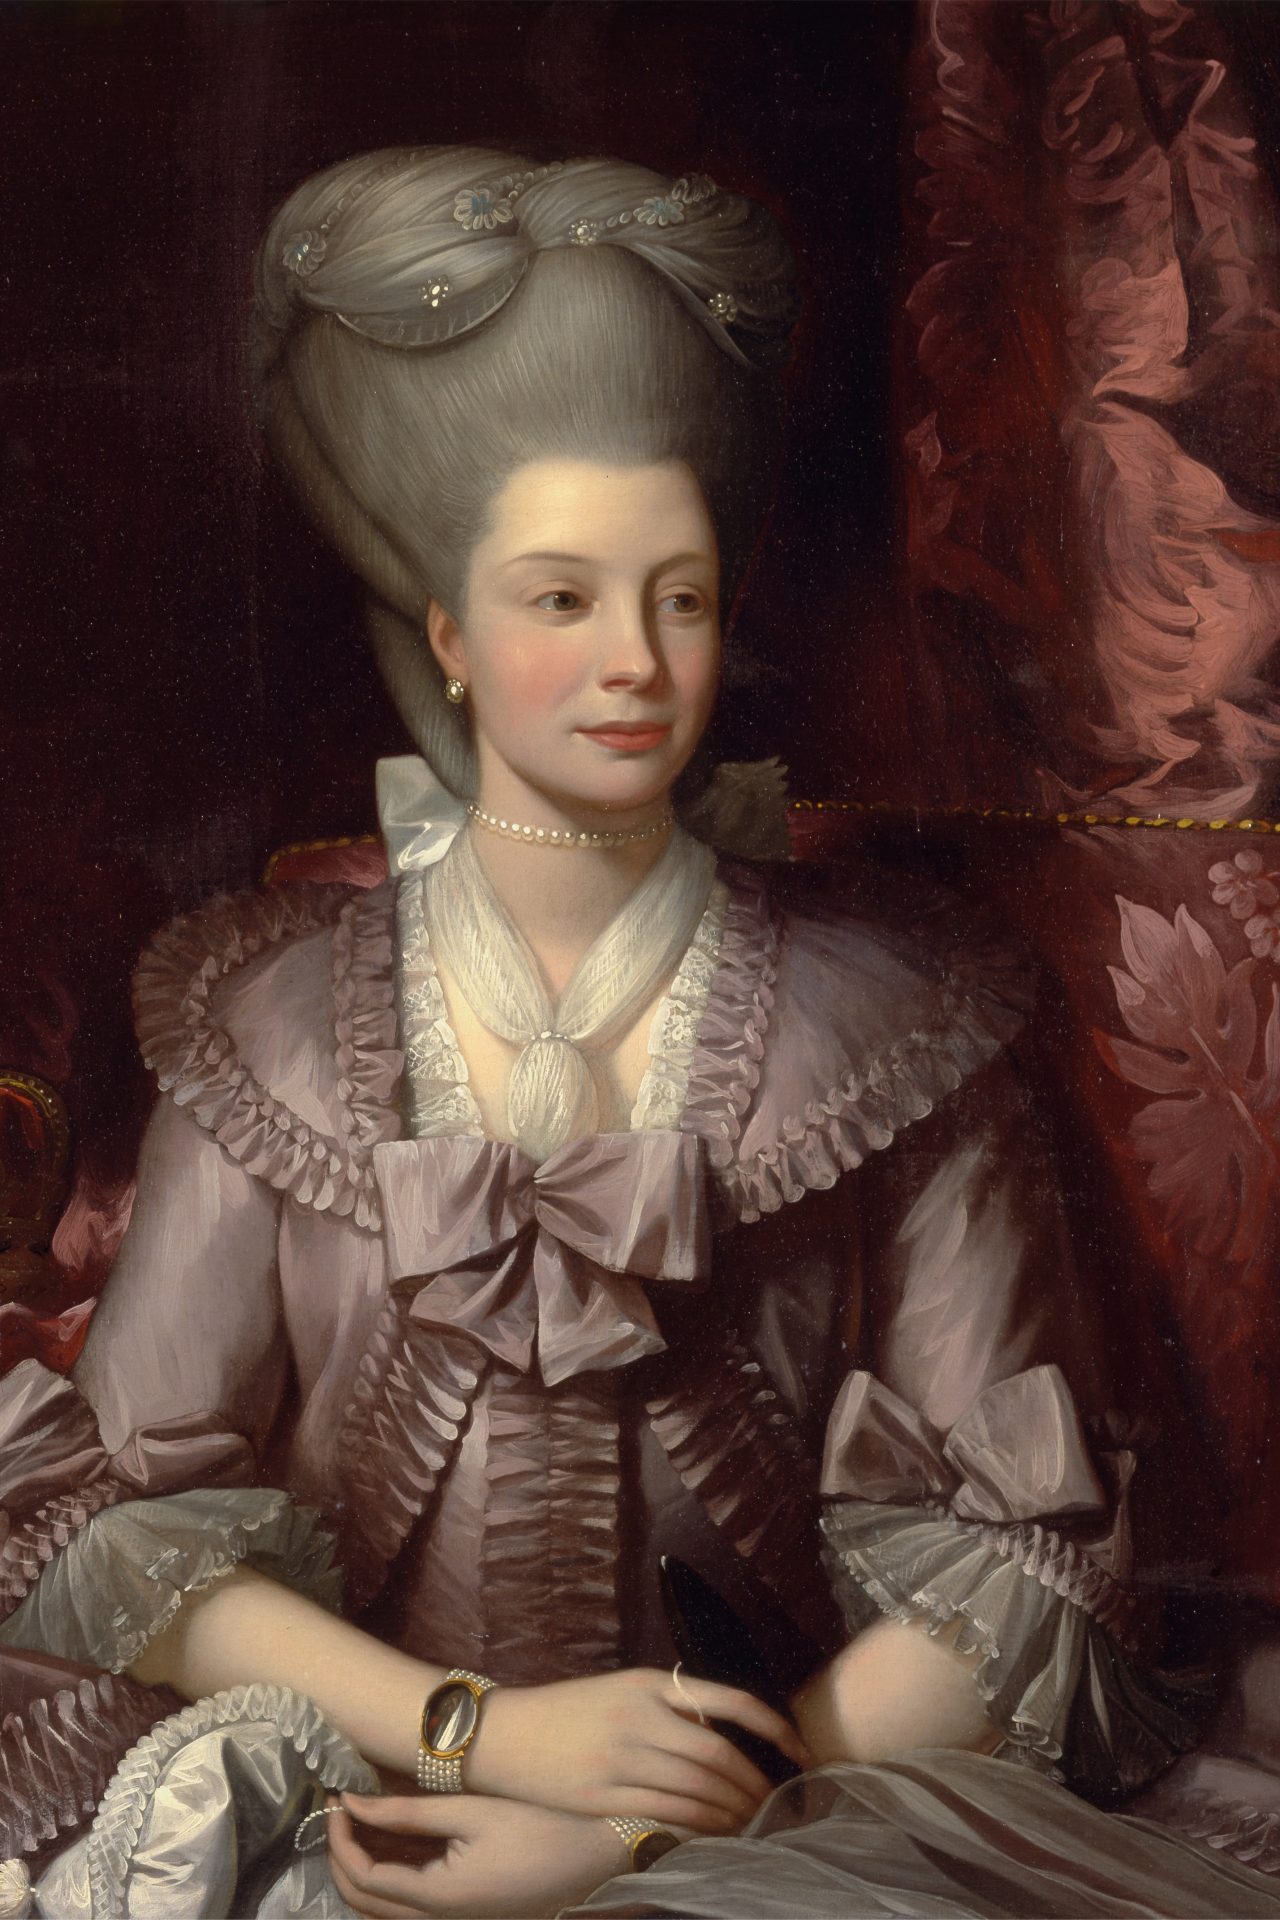 <p>Referring to the paintings of the time, we observe that Queen Charlotte has her face painted with a pale complexion. But that does not necessarily mean that she had white skin. At the time, the nobles whitened themselves with powder. In addition, painters could also have chosen to lighten the skin tones of their subjects.</p> <p>Pictured: a painting of Charlotte by <span>Benjamin West</span> in 1777.</p>